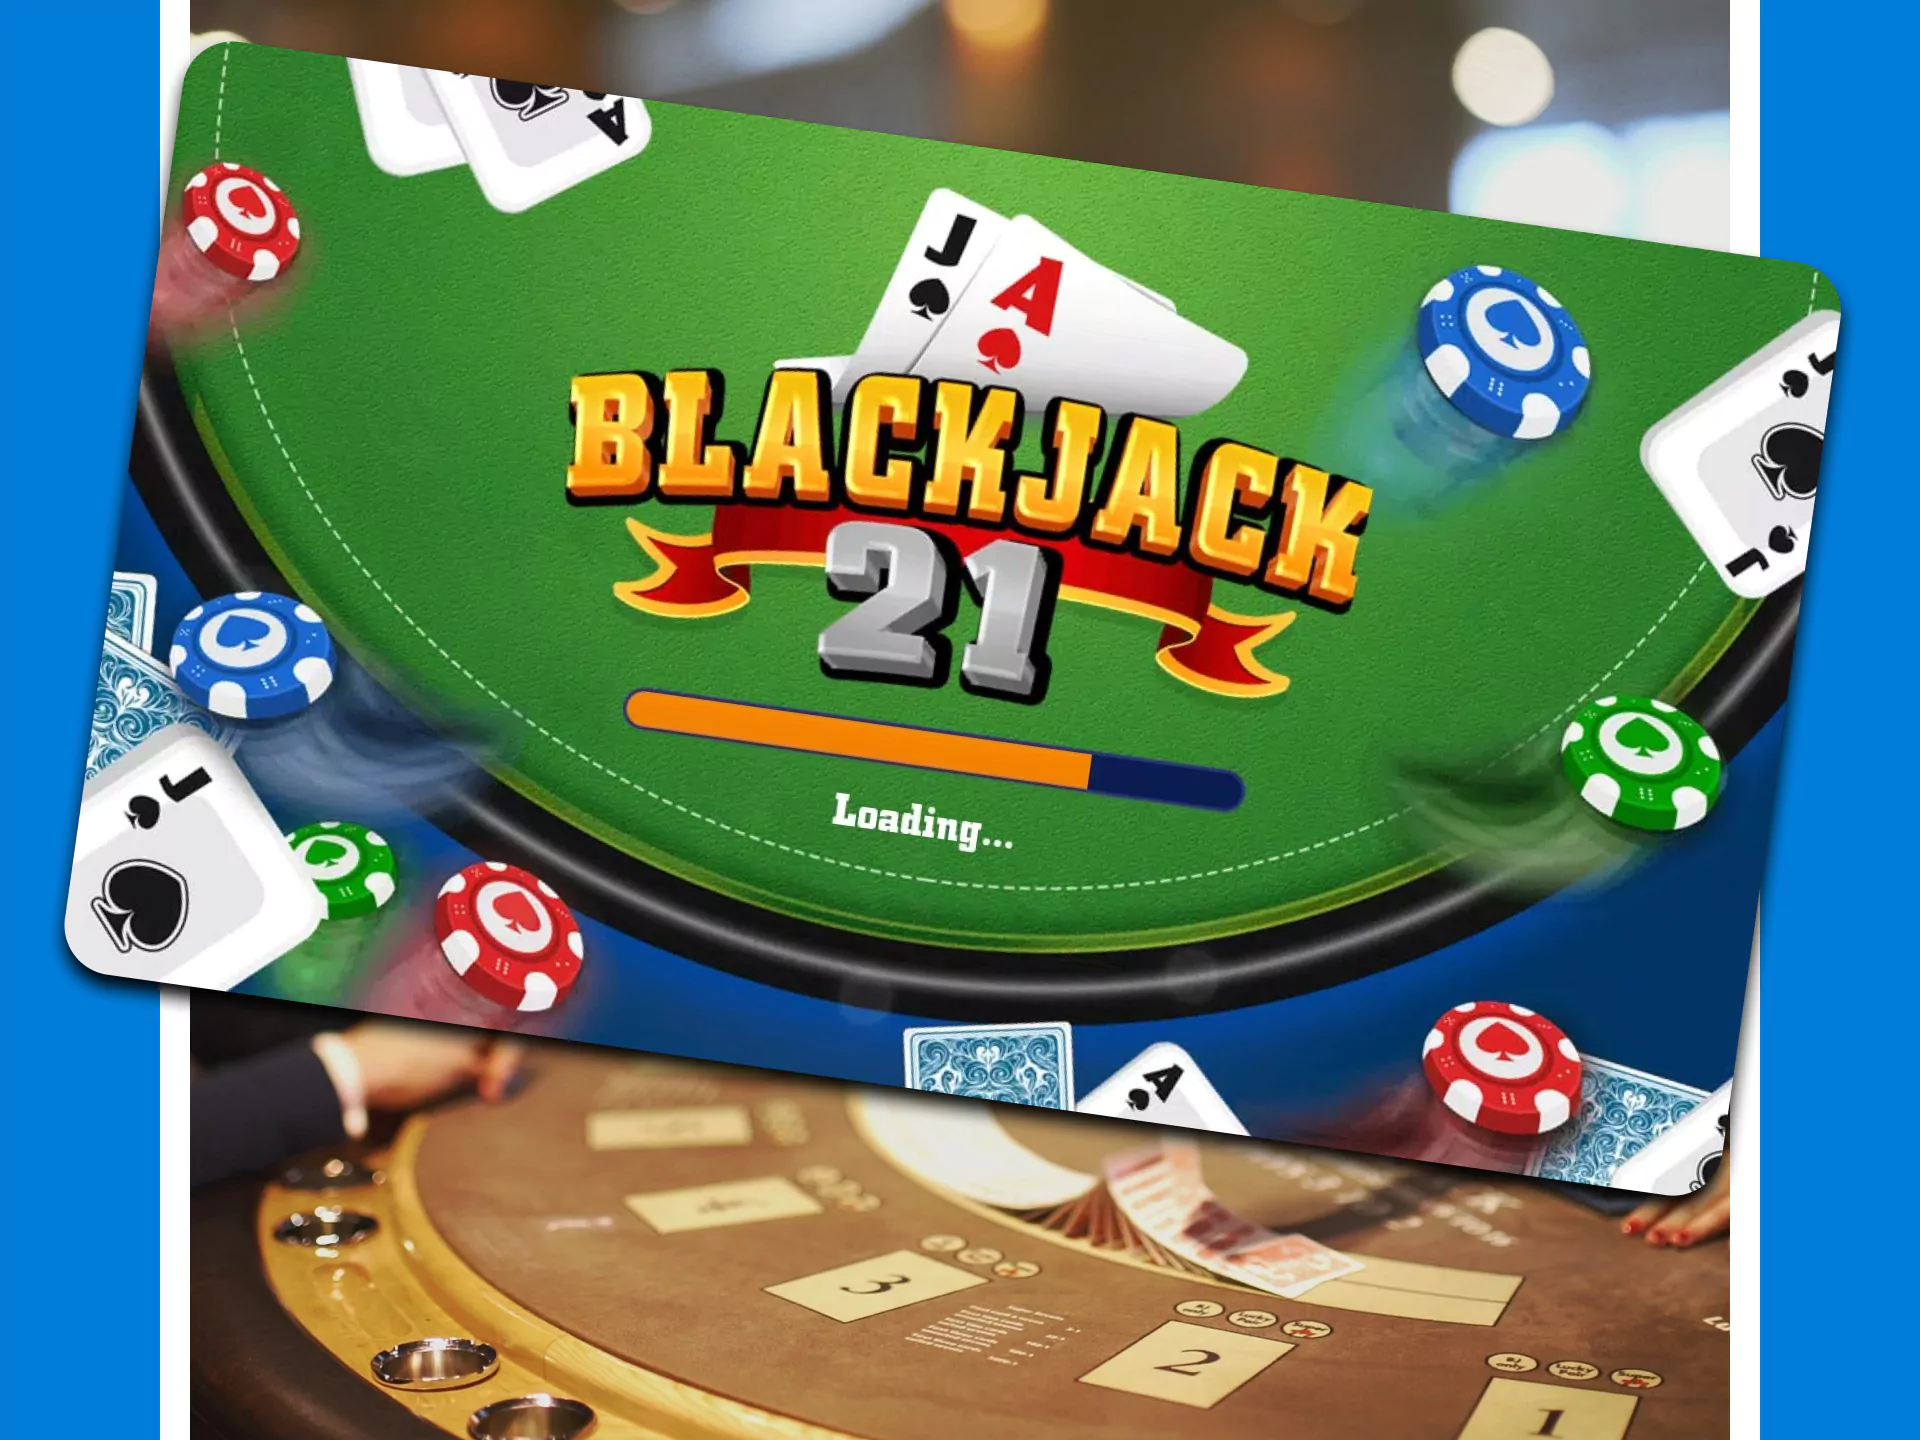 Go to the desired section of Crickex to play blackjack.